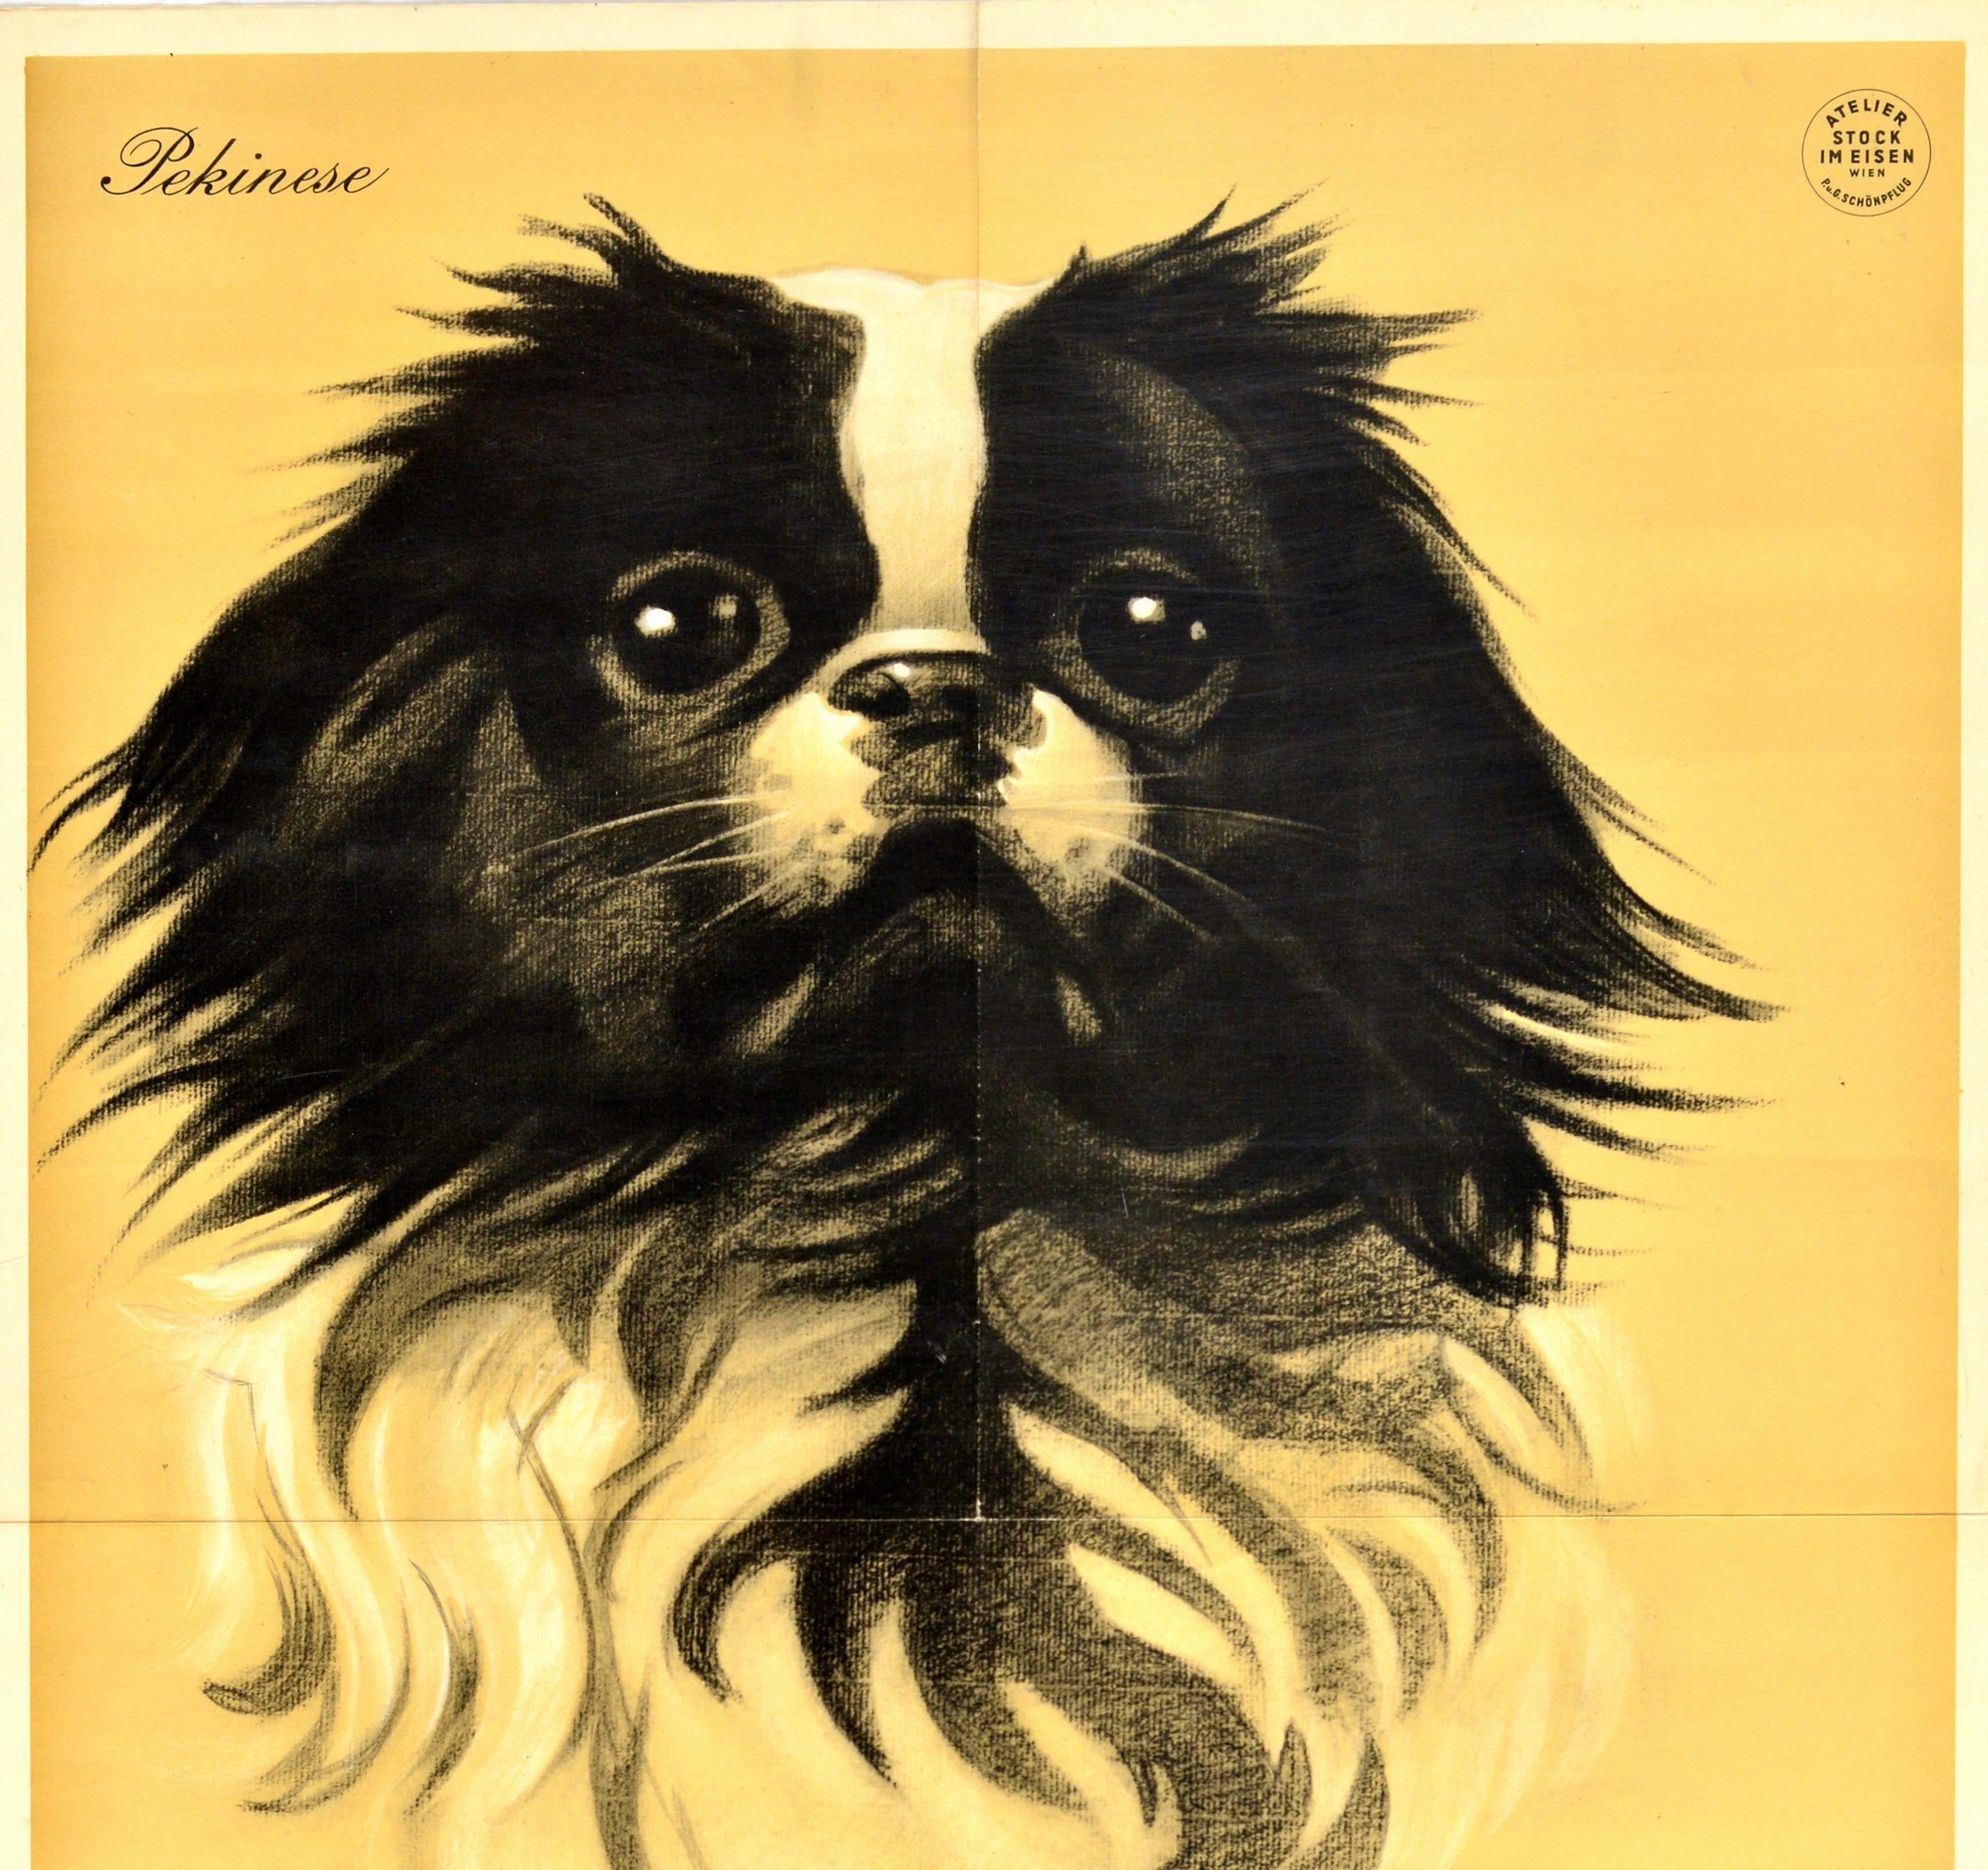 Original vintage advertising poster for Selfix Sport-Strumpfe / Selfix Sports Socks featuring a great black and white illustration of a Pekinese / Pekingese dog against a pale yellow background with the logo and bold black lettering below. One of a